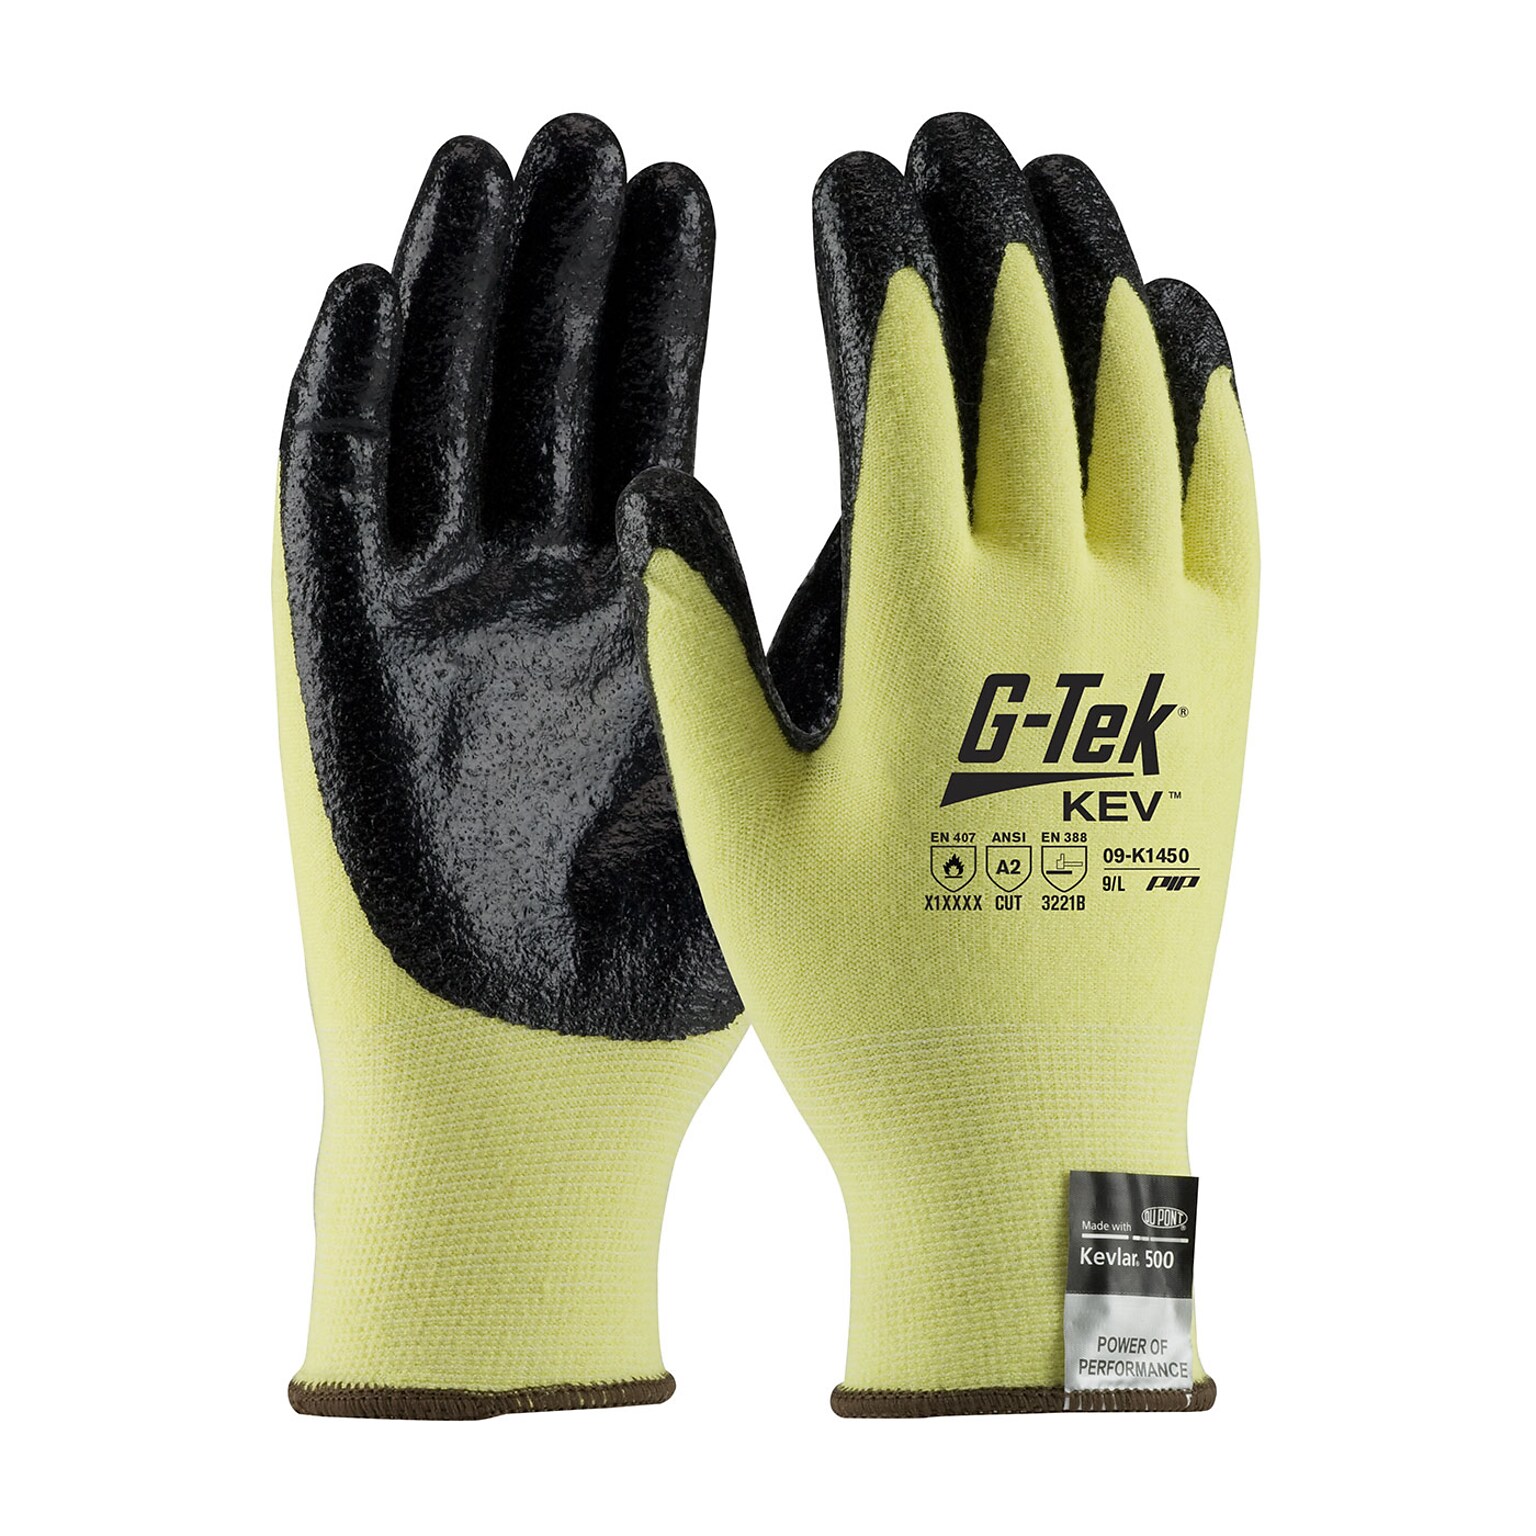 G-Tek KEV Seamless Knit Nitrile Coated Cut Resistant Gloves, ANSI A2, Yellow, X-Large, 12 Pairs (09-K1450/M)